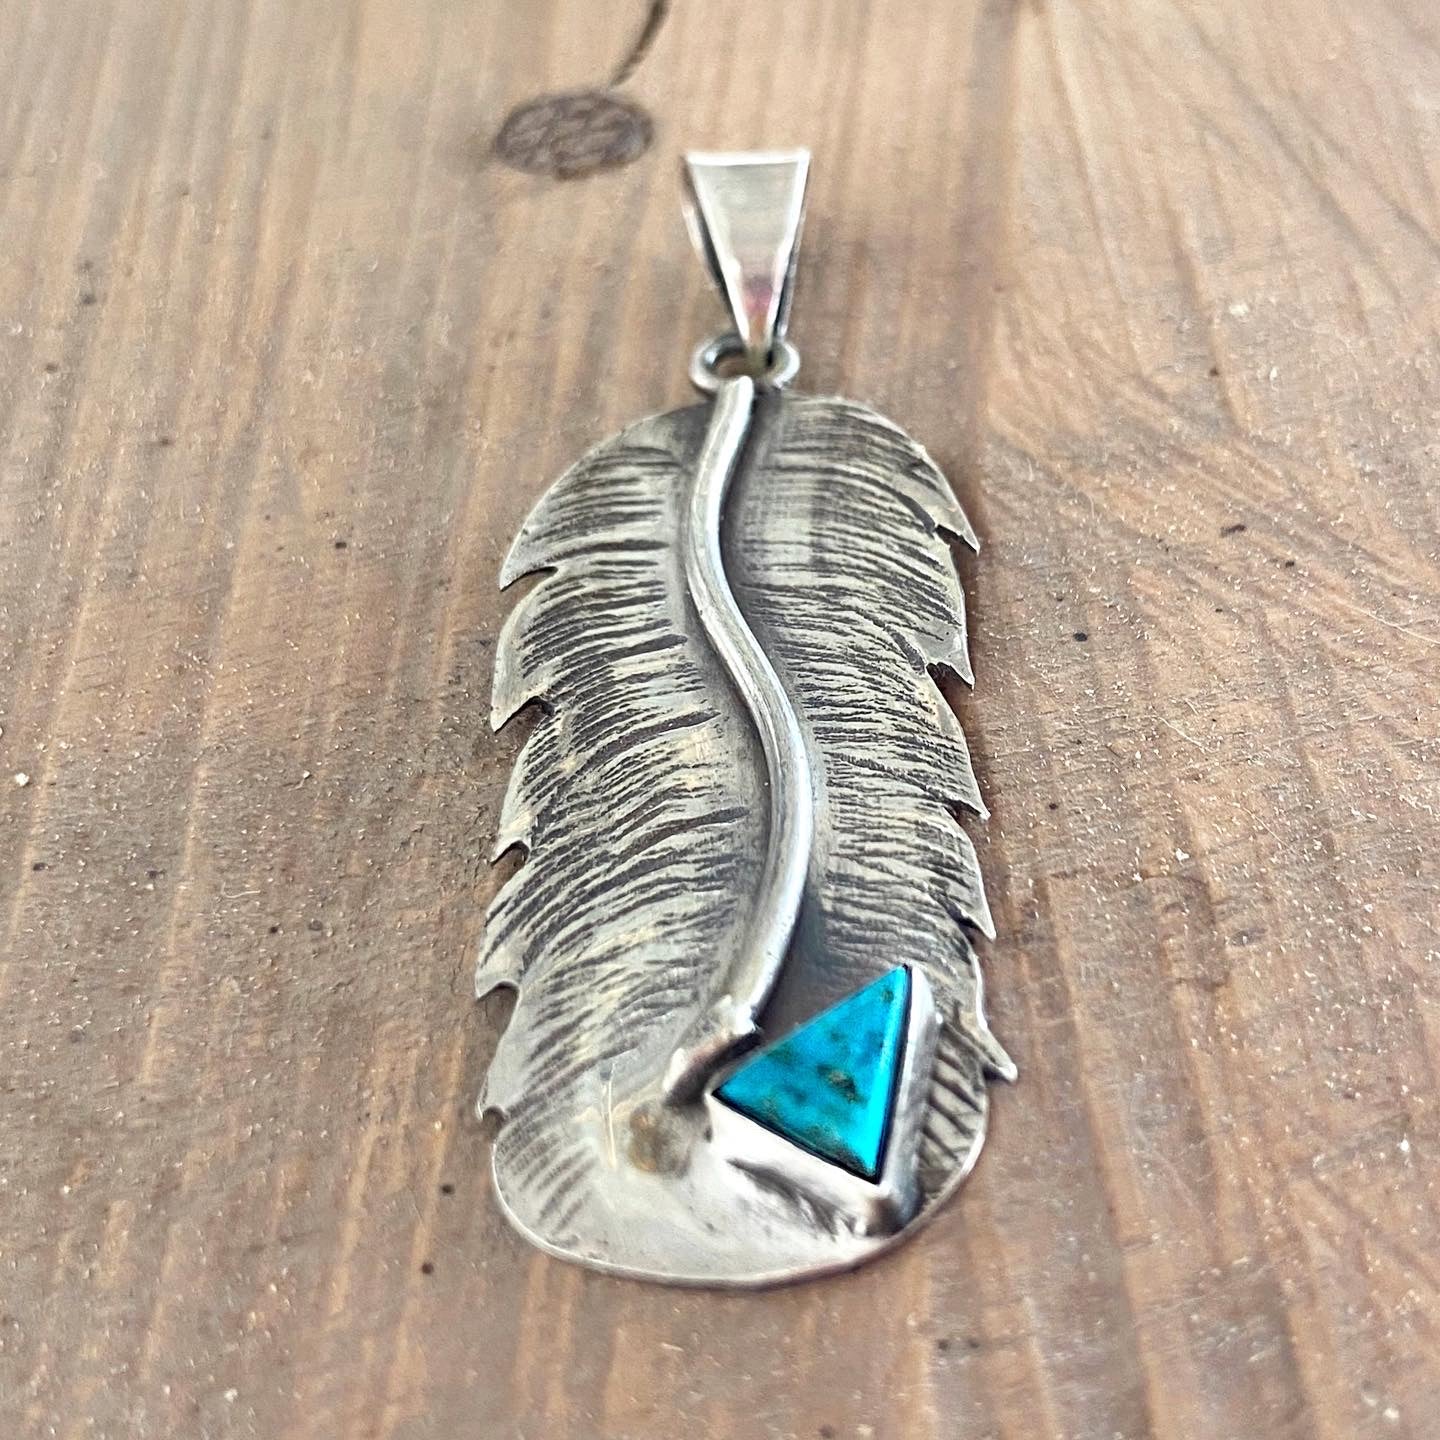 Handmade Sterling Silver925 pendant with a turquoise